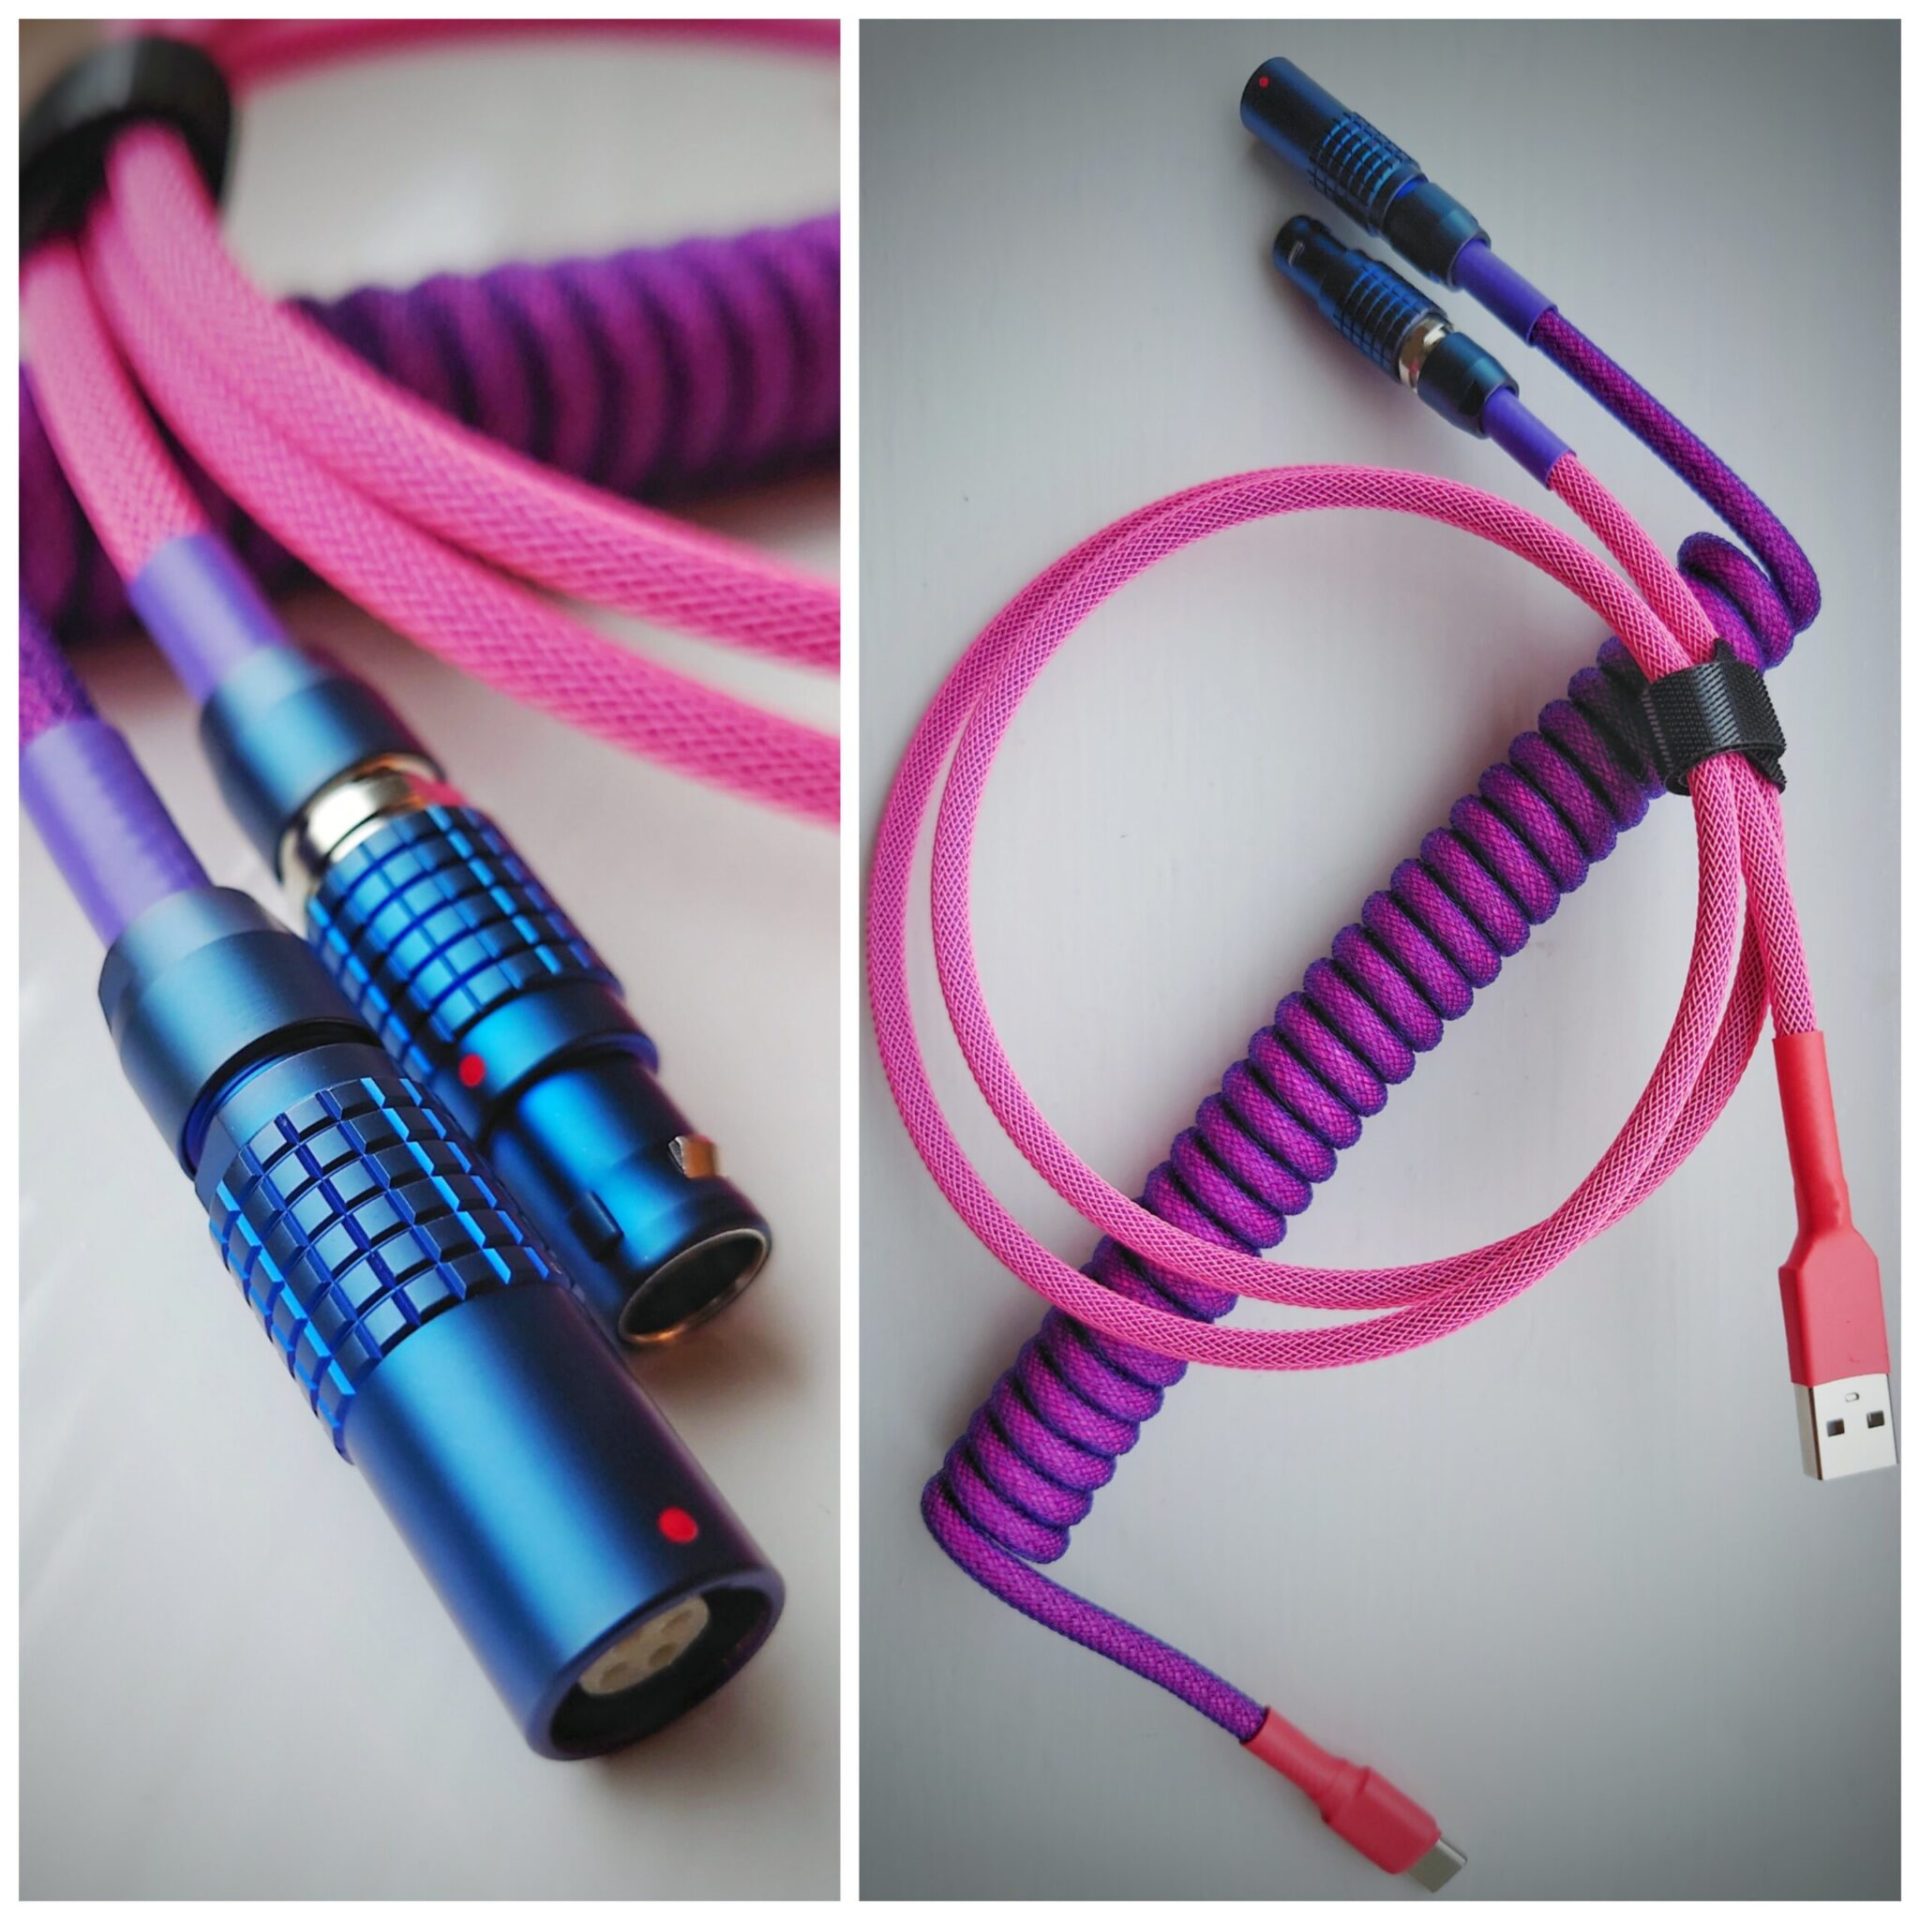 Build Your Own: GMK Laser Themed Cable | Made in UK